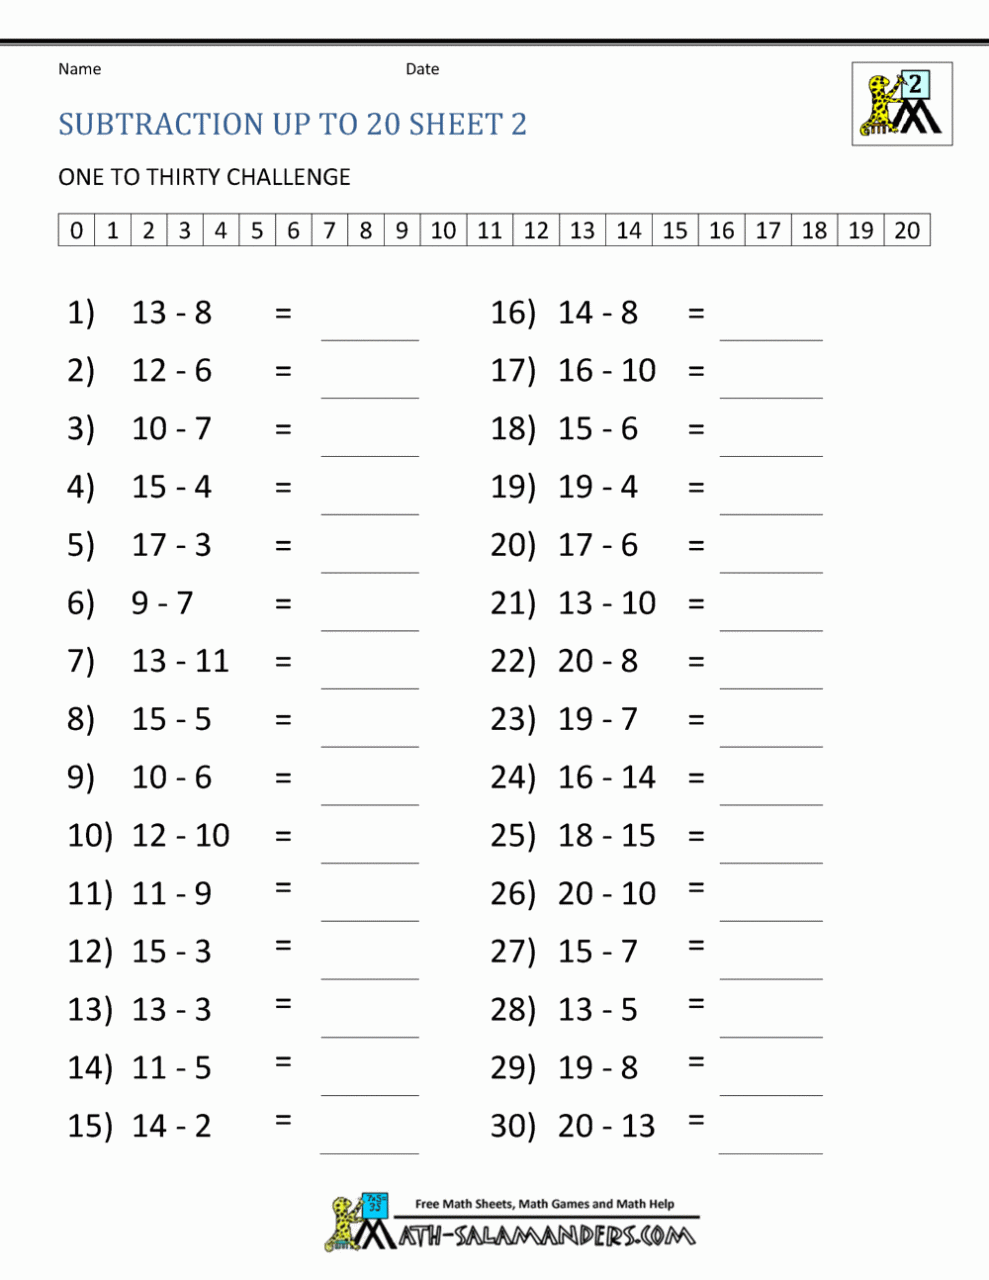 Division As Repeated Subtraction Worksheet For Grade 2 subtraction